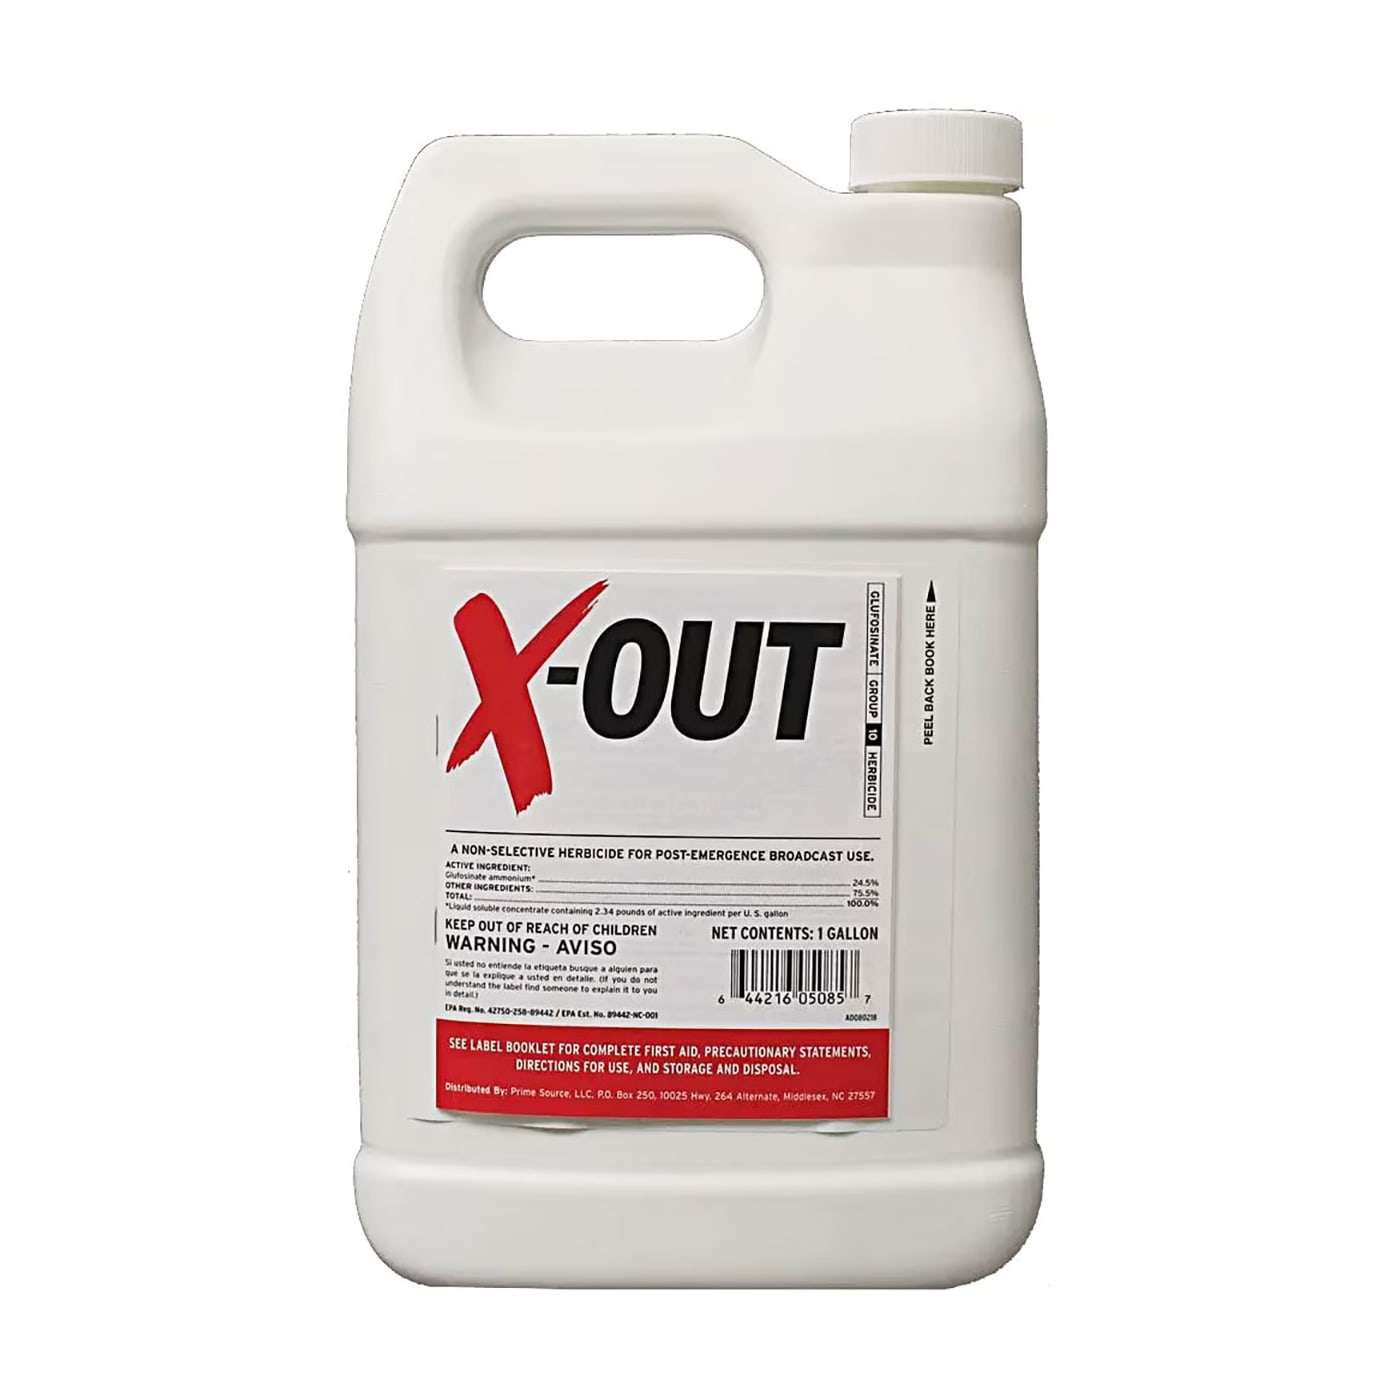  x-Out Herbicide